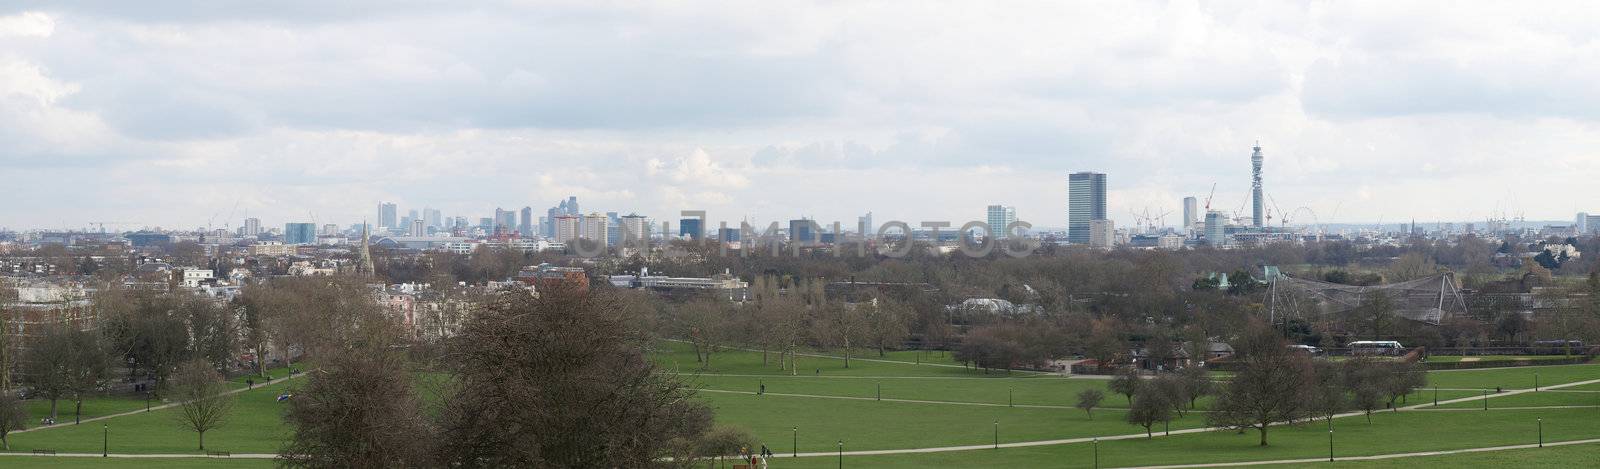 London panorama with city skyline seen from Primrose Hill